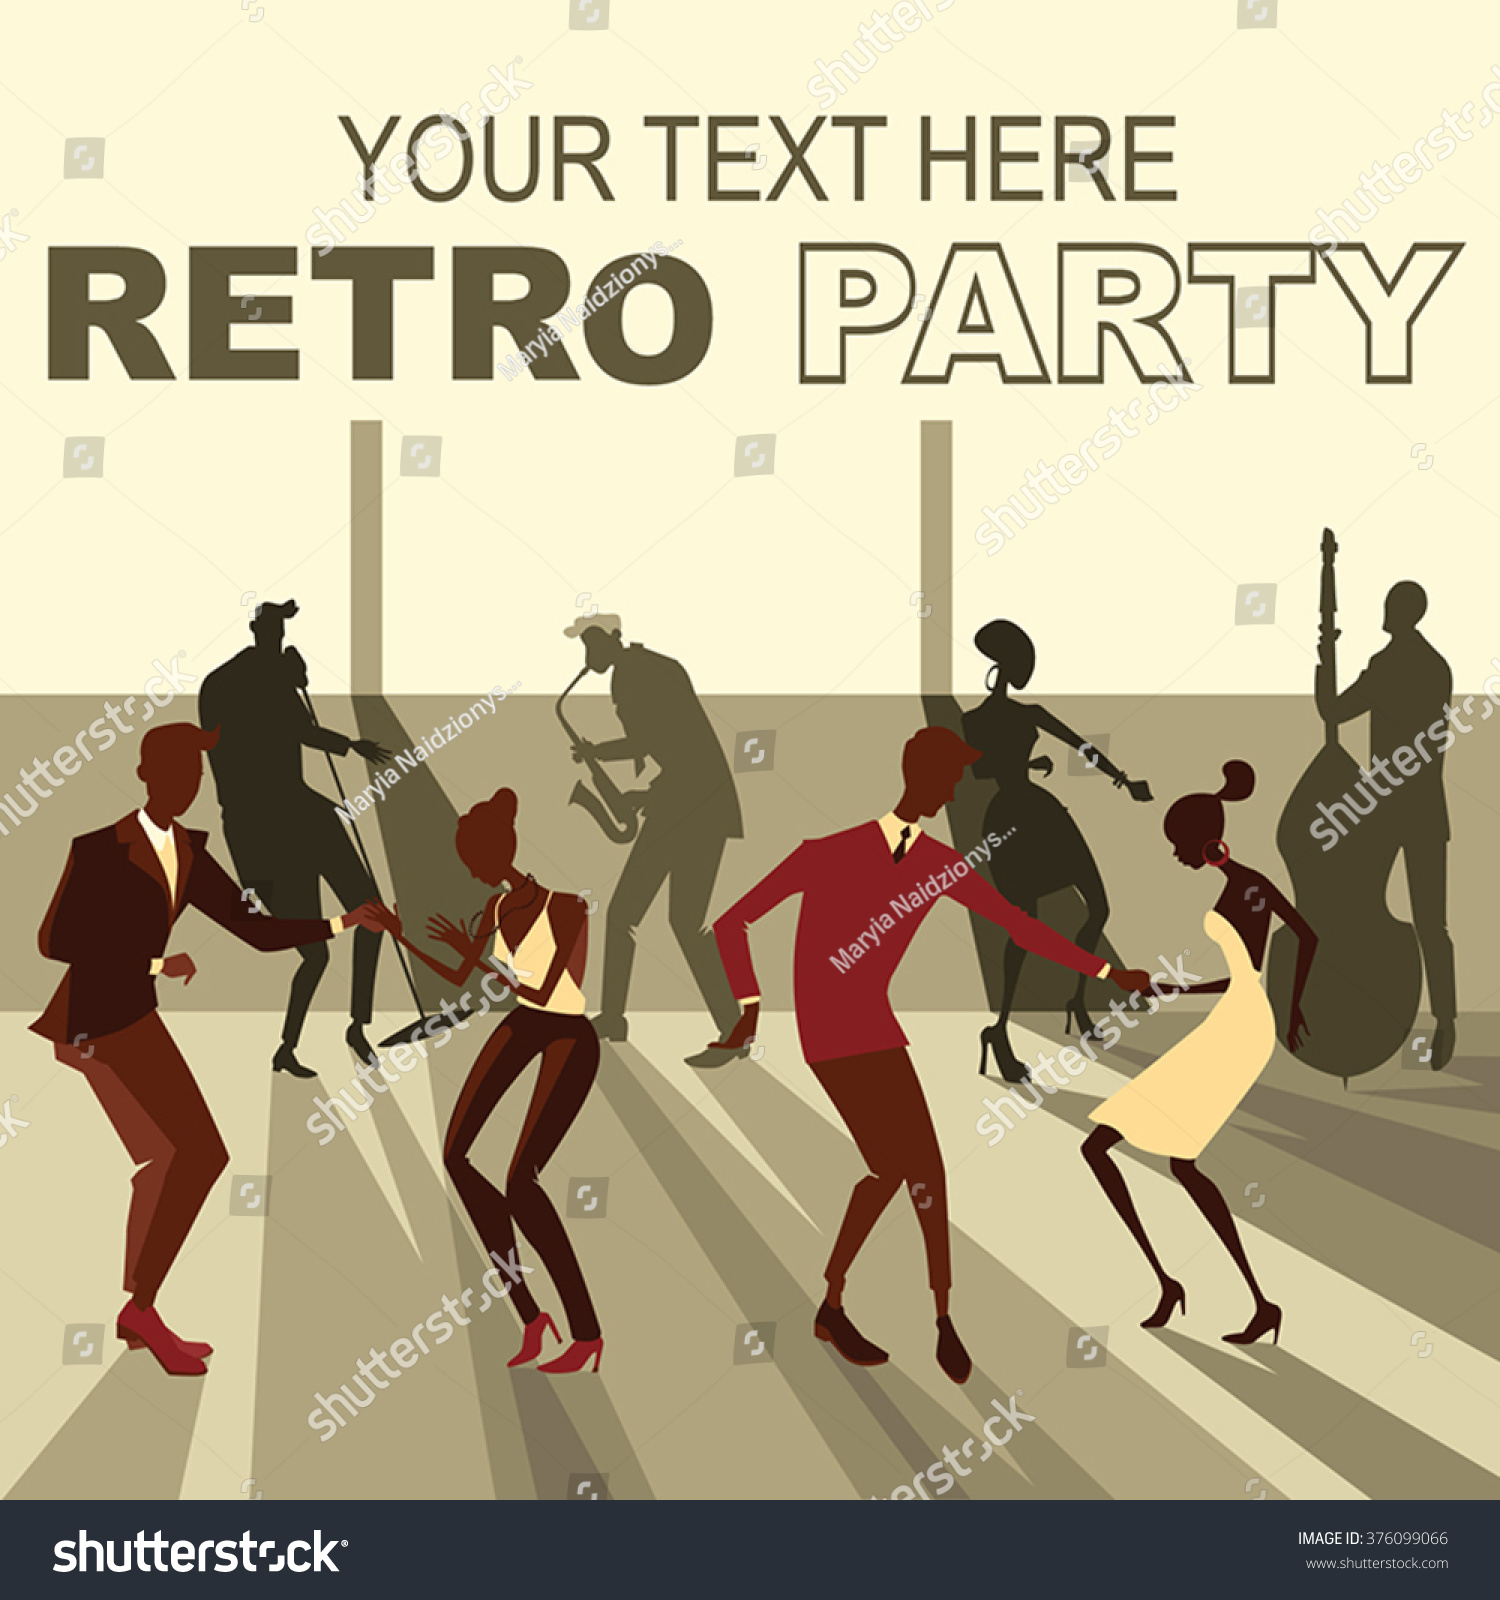 Vector illustration of people dancing the twist on the retro party #376099066